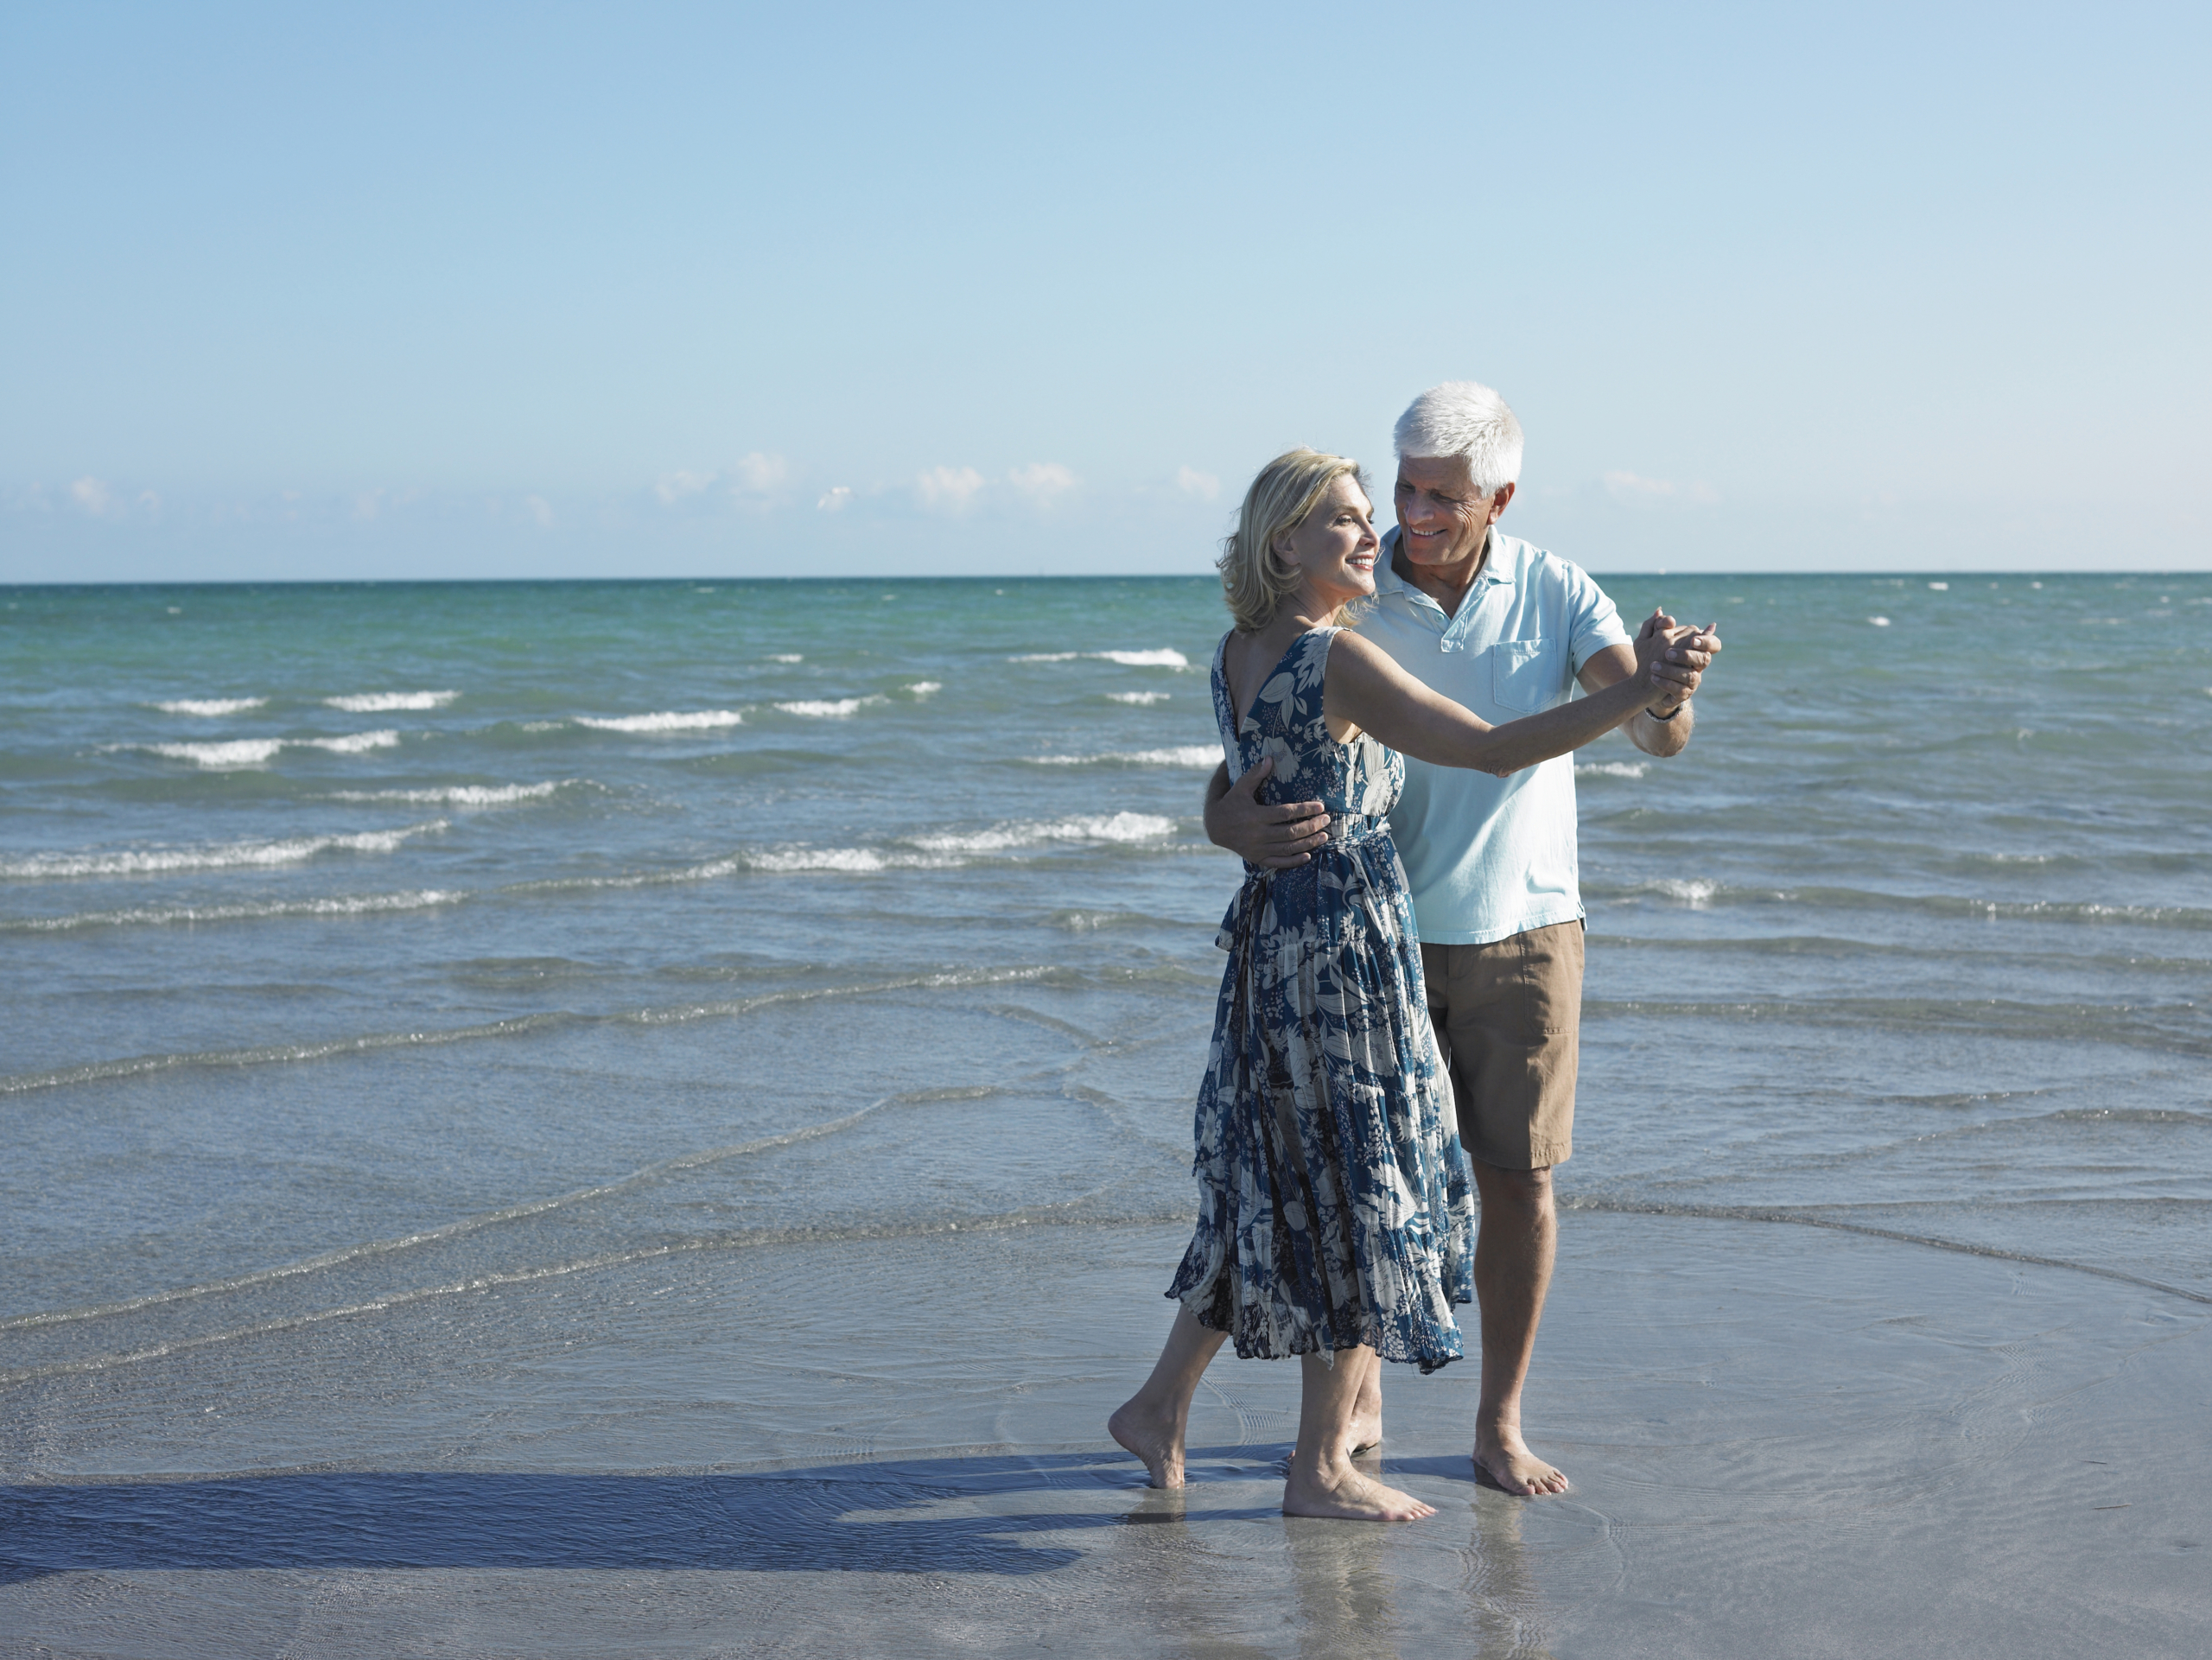 A couple in their 60s dancing on the beach and celebrating downsizing their home